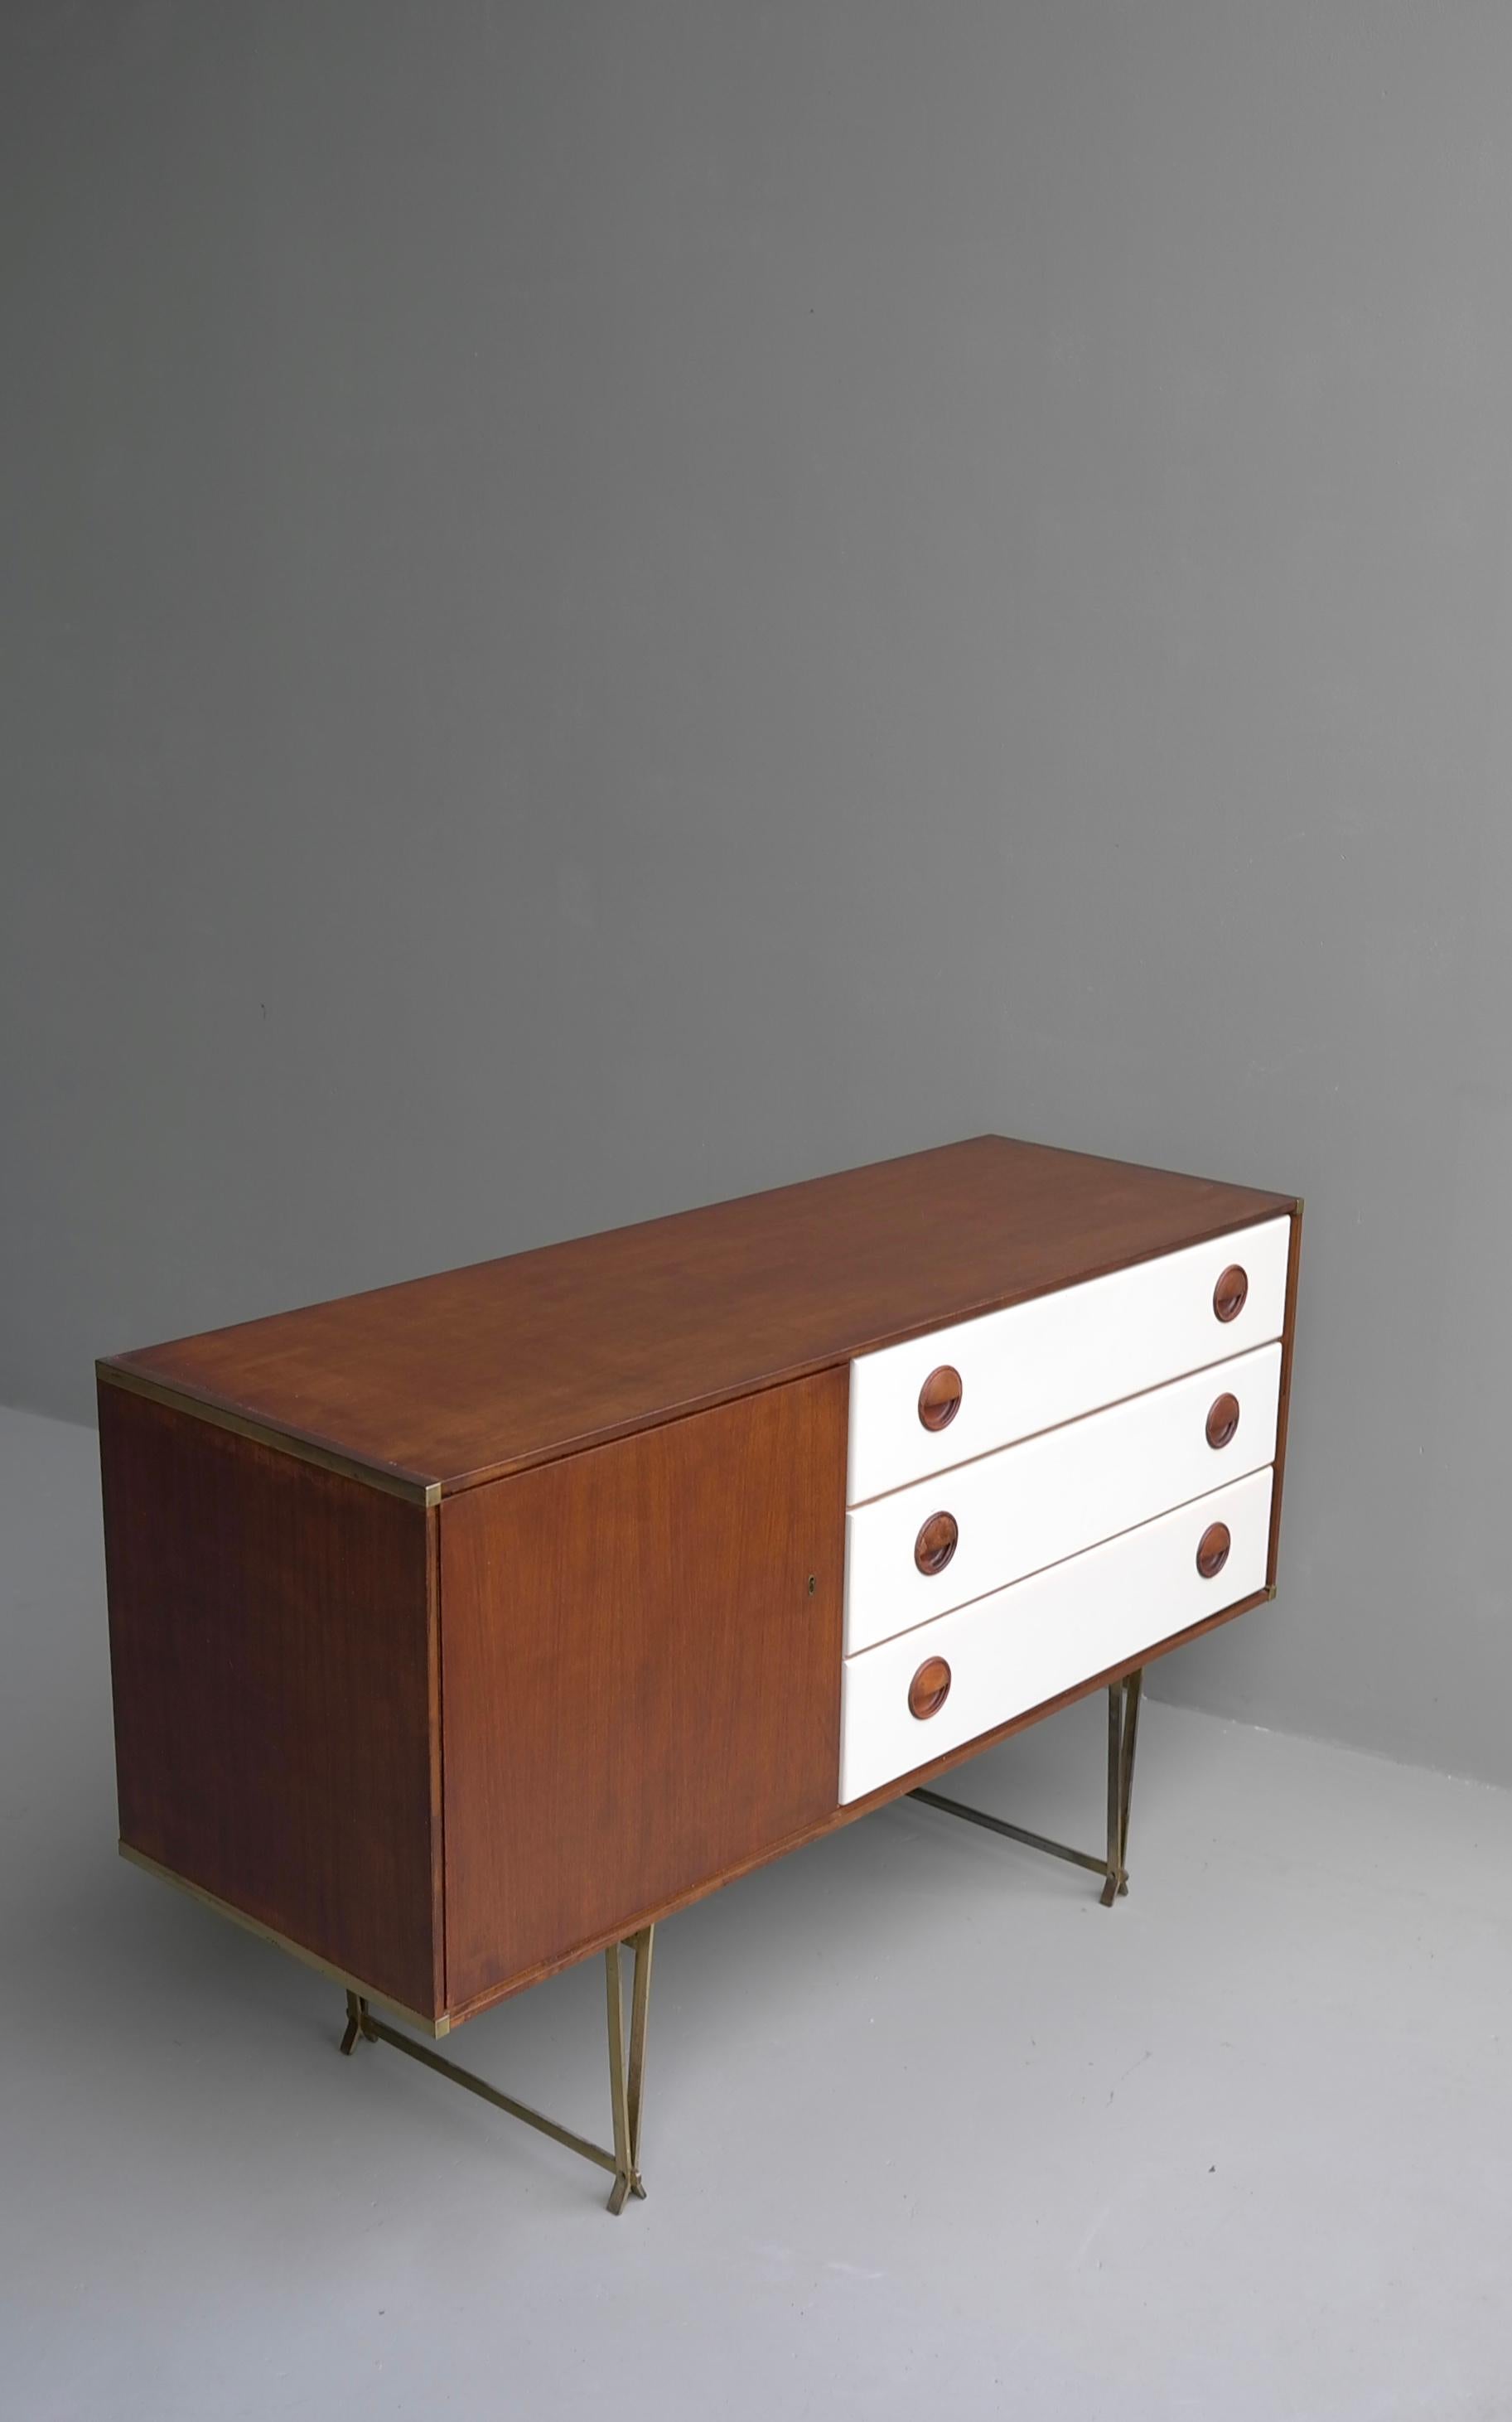 Rare Fristho sideboard by Wim Crouwel in teak and white, with fine brass Leggs, also the corners are made of solid brass. With three drawers and one storage compartment with key.